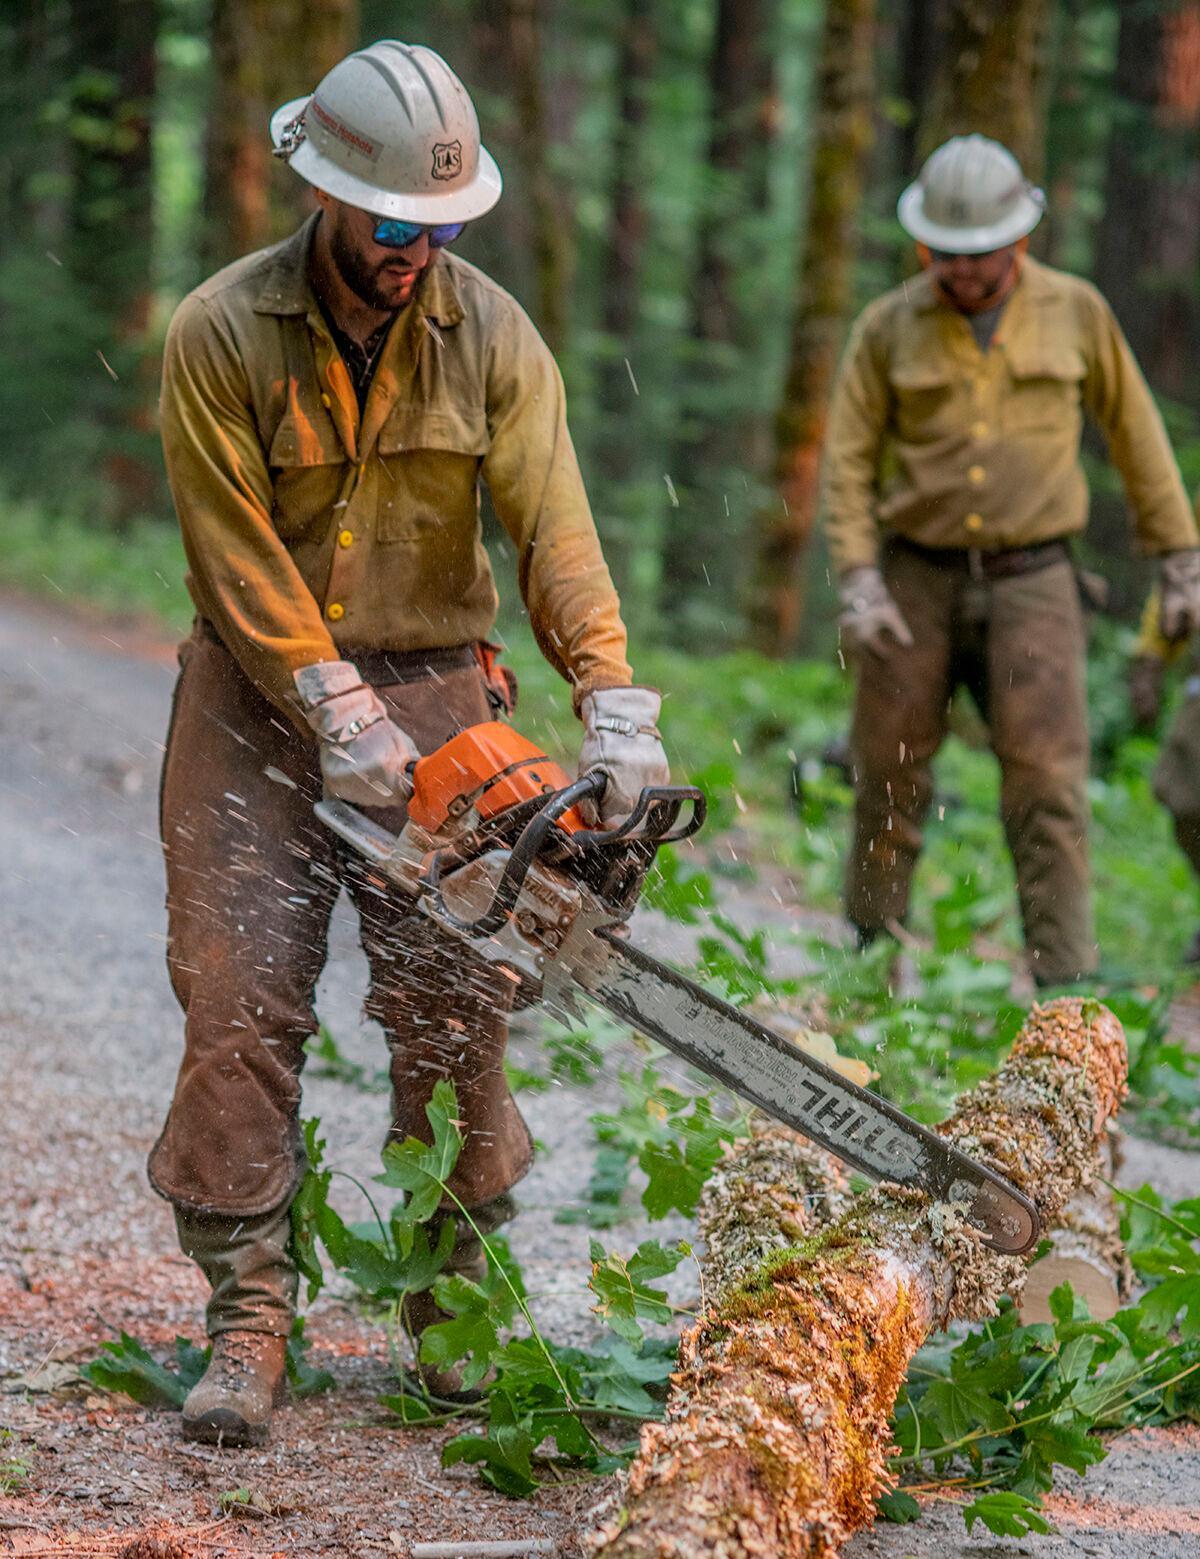 Individual in fire gear uses a chainsaw to cut a tree on a road. Another individual is nearby to remove the smaller pieces from the road.